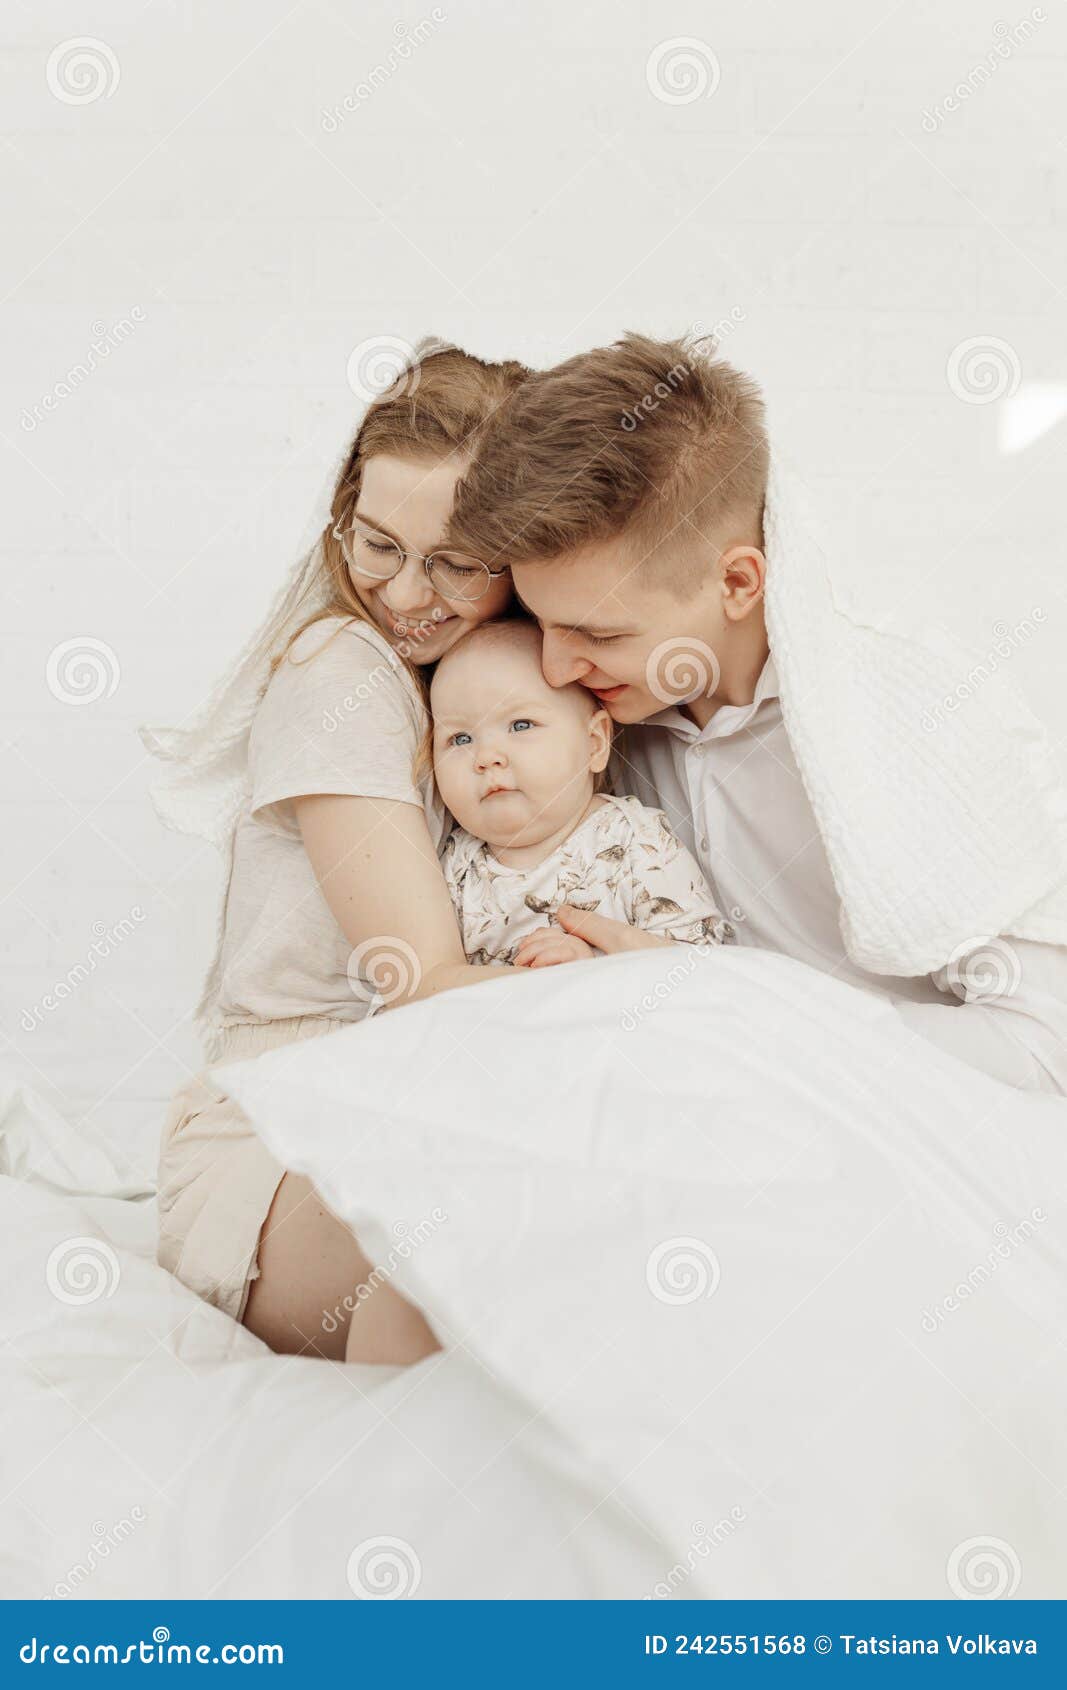 portrait of young happy smiling beautiful family with cute cherubic infant baby in white clothes sitting on white bed.